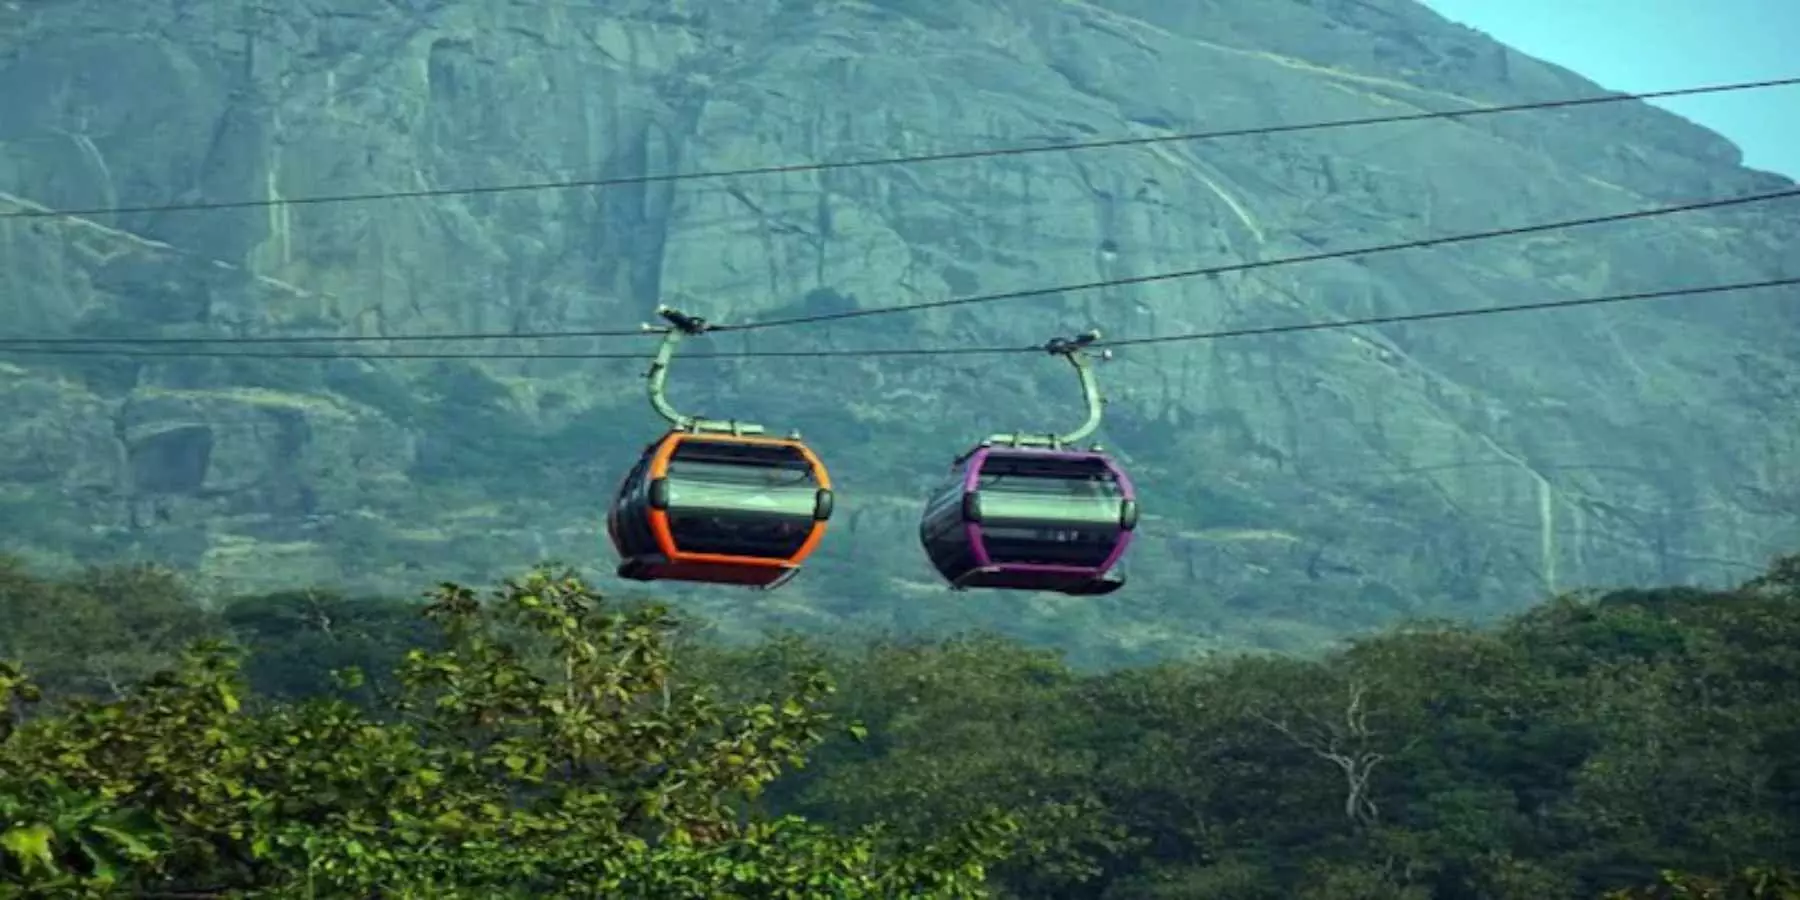 flurry of proposals for ropeway projects in india more than 25 states sent 260 proposals